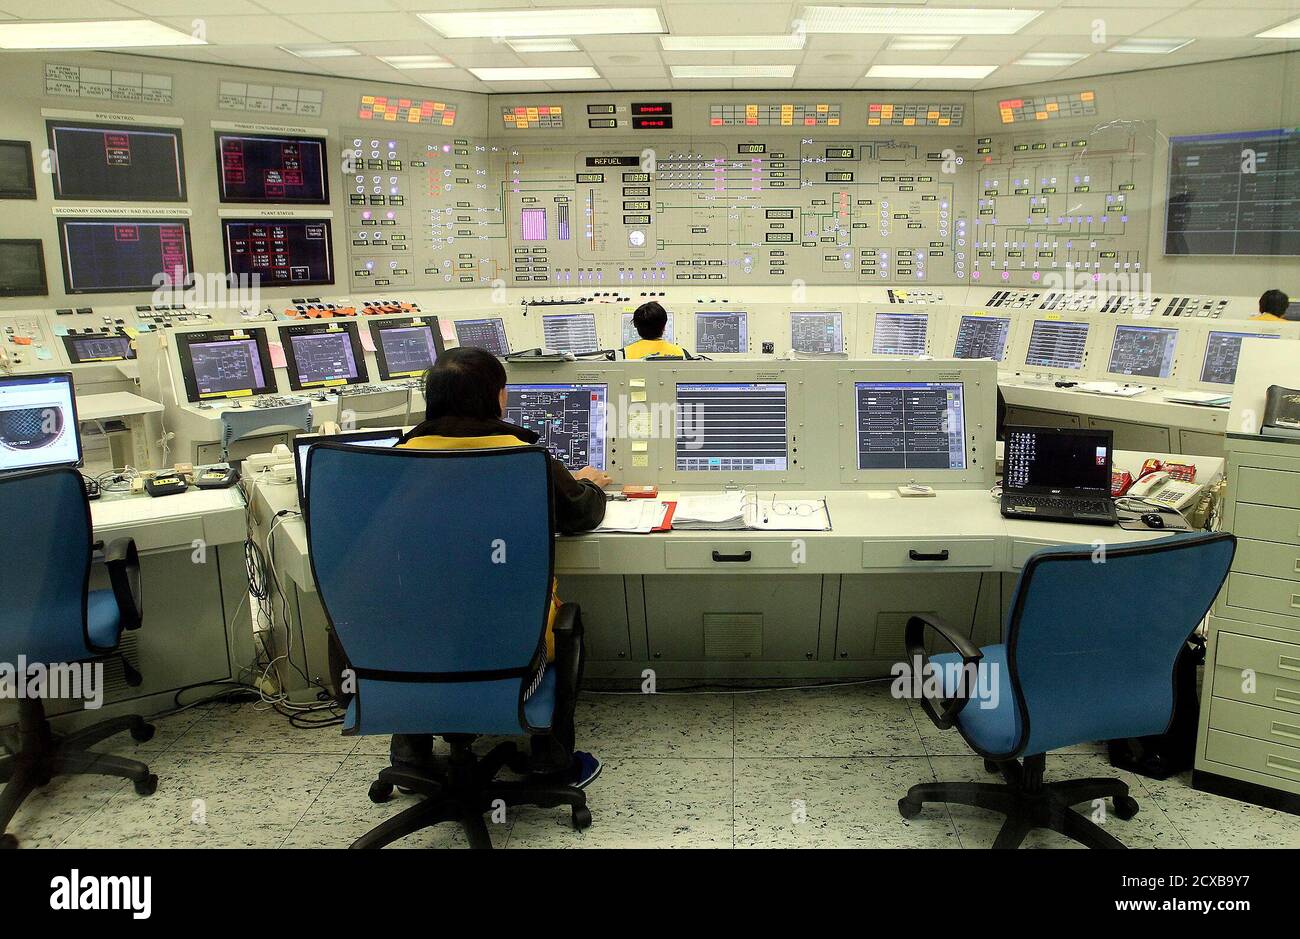 Employees look at readings inside the control room of the first reactor at yet-to-be-completed Taipower Fourth Nuclear Power Plant in Gongliao, New Taipei City, May 14, 2012. The completion date of the Fourth Nuclear Power Plant is repeatedly postponed due to safety concern. Taipower had incorporated improvements to the project, such as an emergency diesel generator facility, after the Fukushima Nuclear Power Plant crisis in Japan, according to local media. REUTERS/Fang Wan-ming/Pool (TAIWAN - Tags: ENERGY) Stock Photo